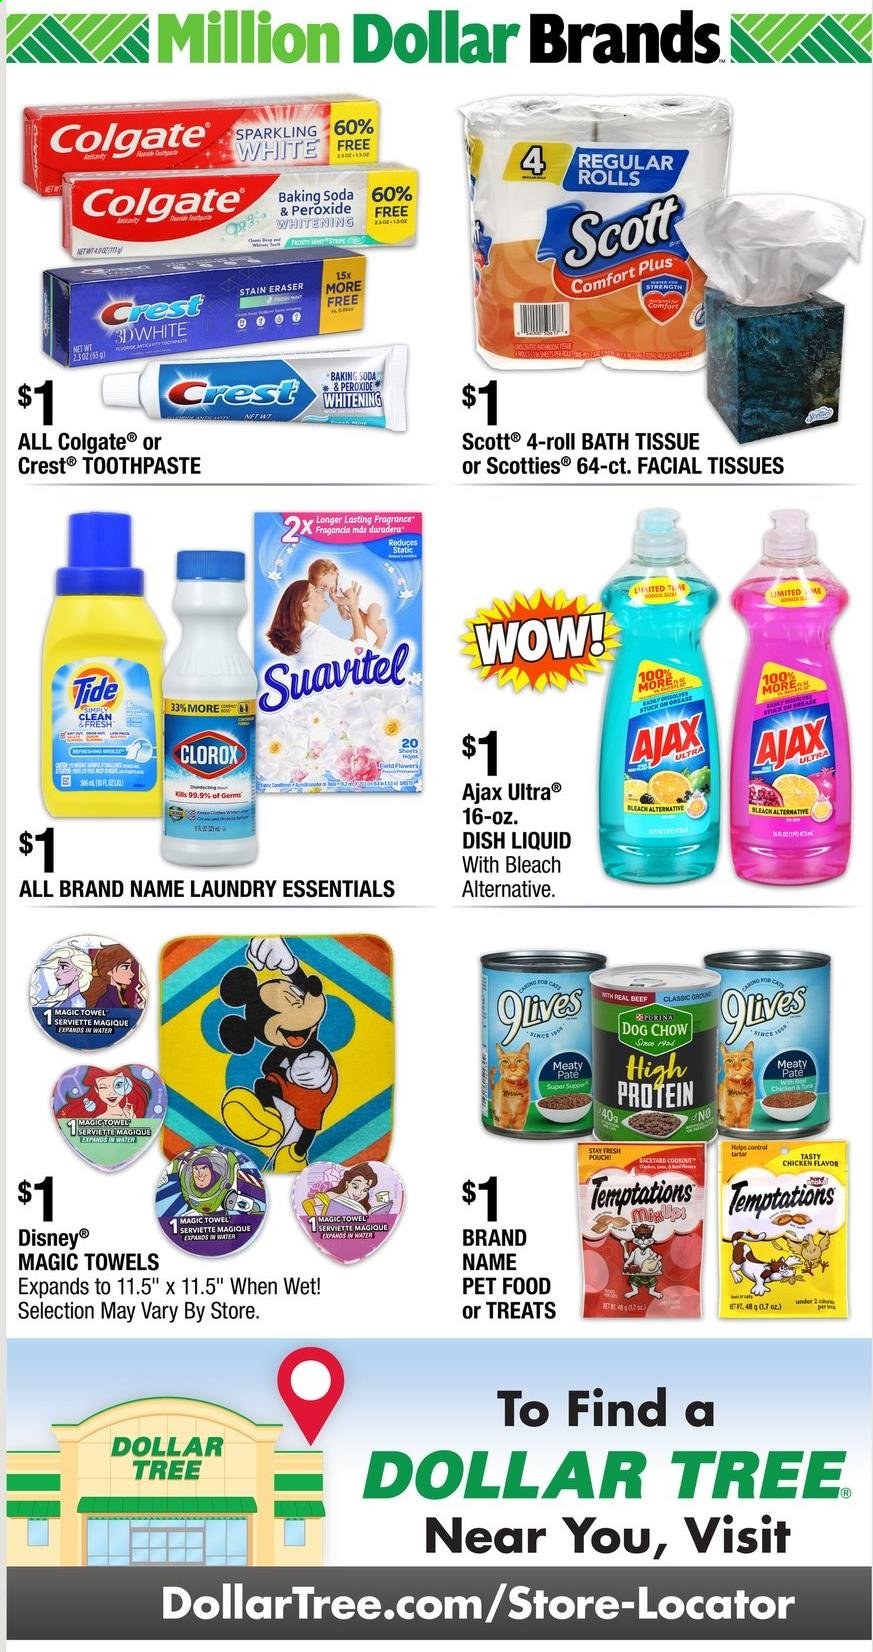 thumbnail - Dollar Tree Flyer - 03/28/2021 - 04/04/2021 - Sales products - bicarbonate of soda, Disney, bath tissue, Clorox, Ajax, Tide, bleach, laundry detergent, dishwashing liquid, Colgate, toothpaste, Crest, facial tissues, fragrance, eraser, towel, Dog Chow, Purina, 9lives, Scott. Page 4.